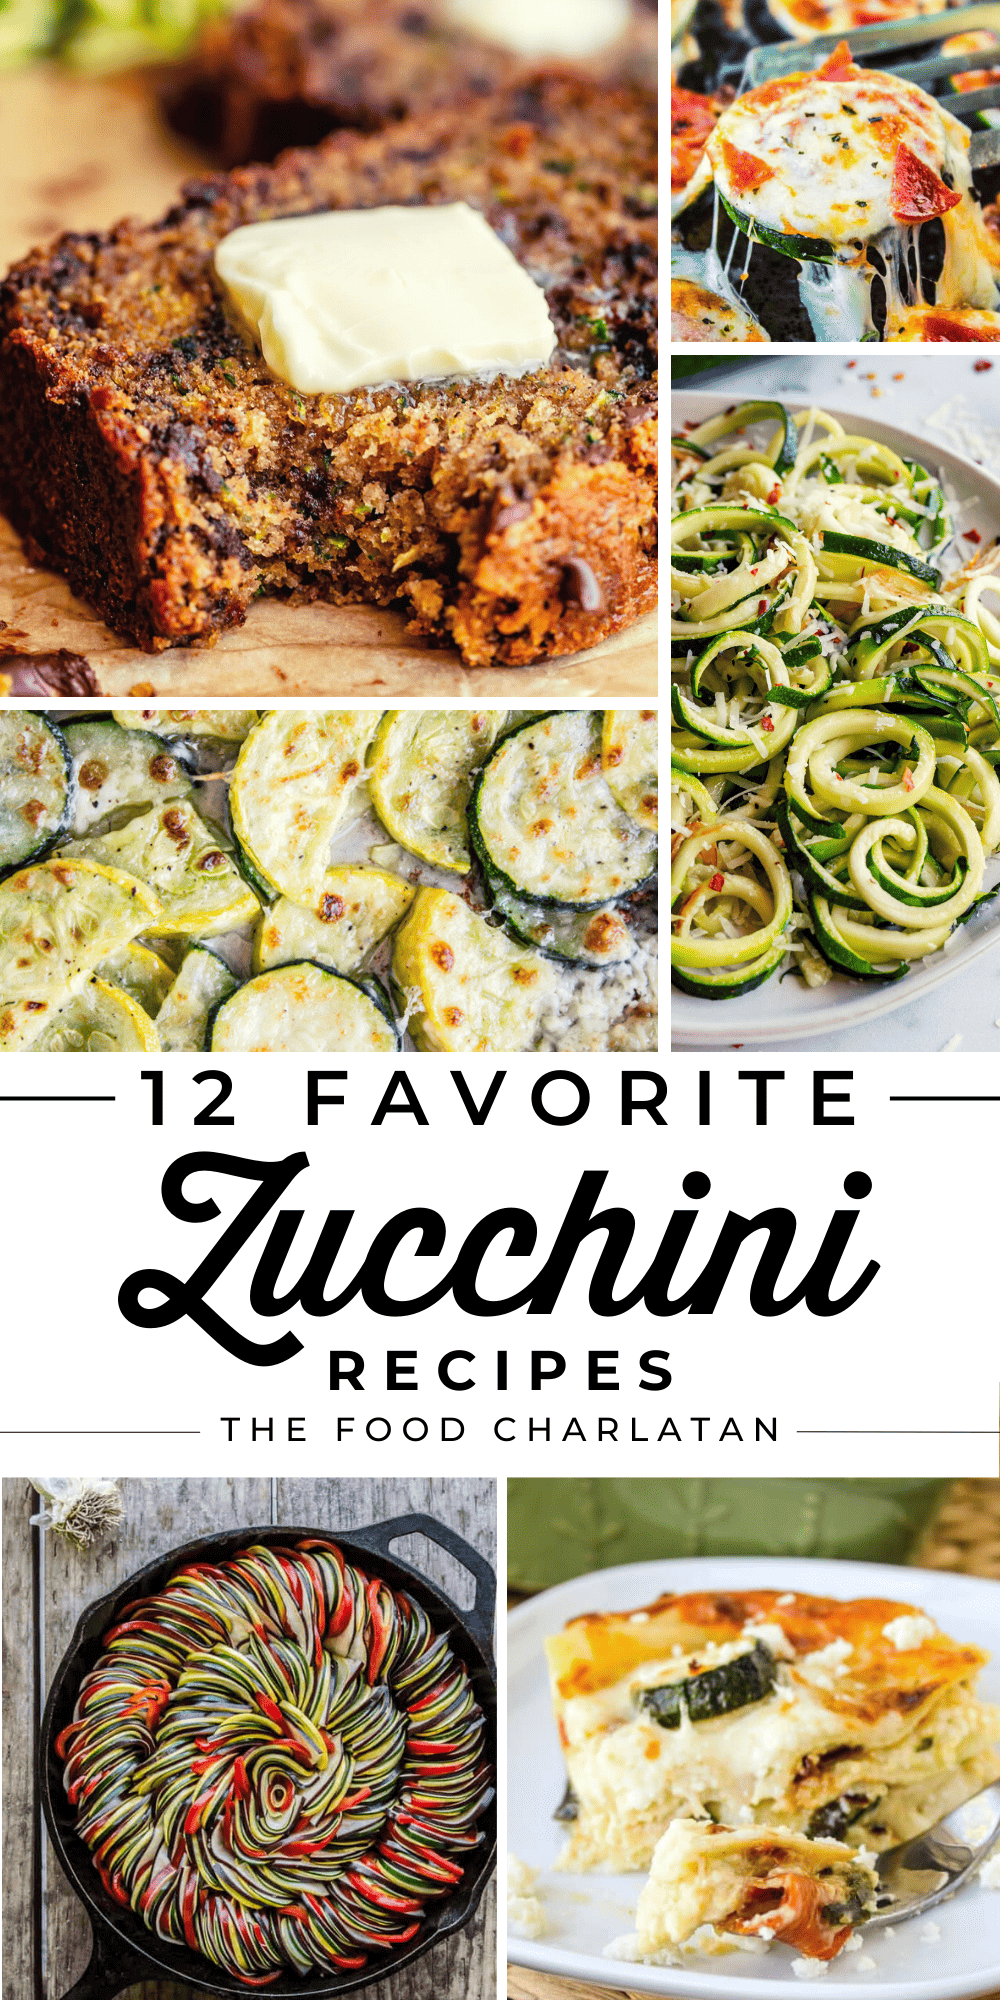 collage of pictures of food using zucchini, like zucchini bread, zoodles, ratatouille, lasagna, etc.